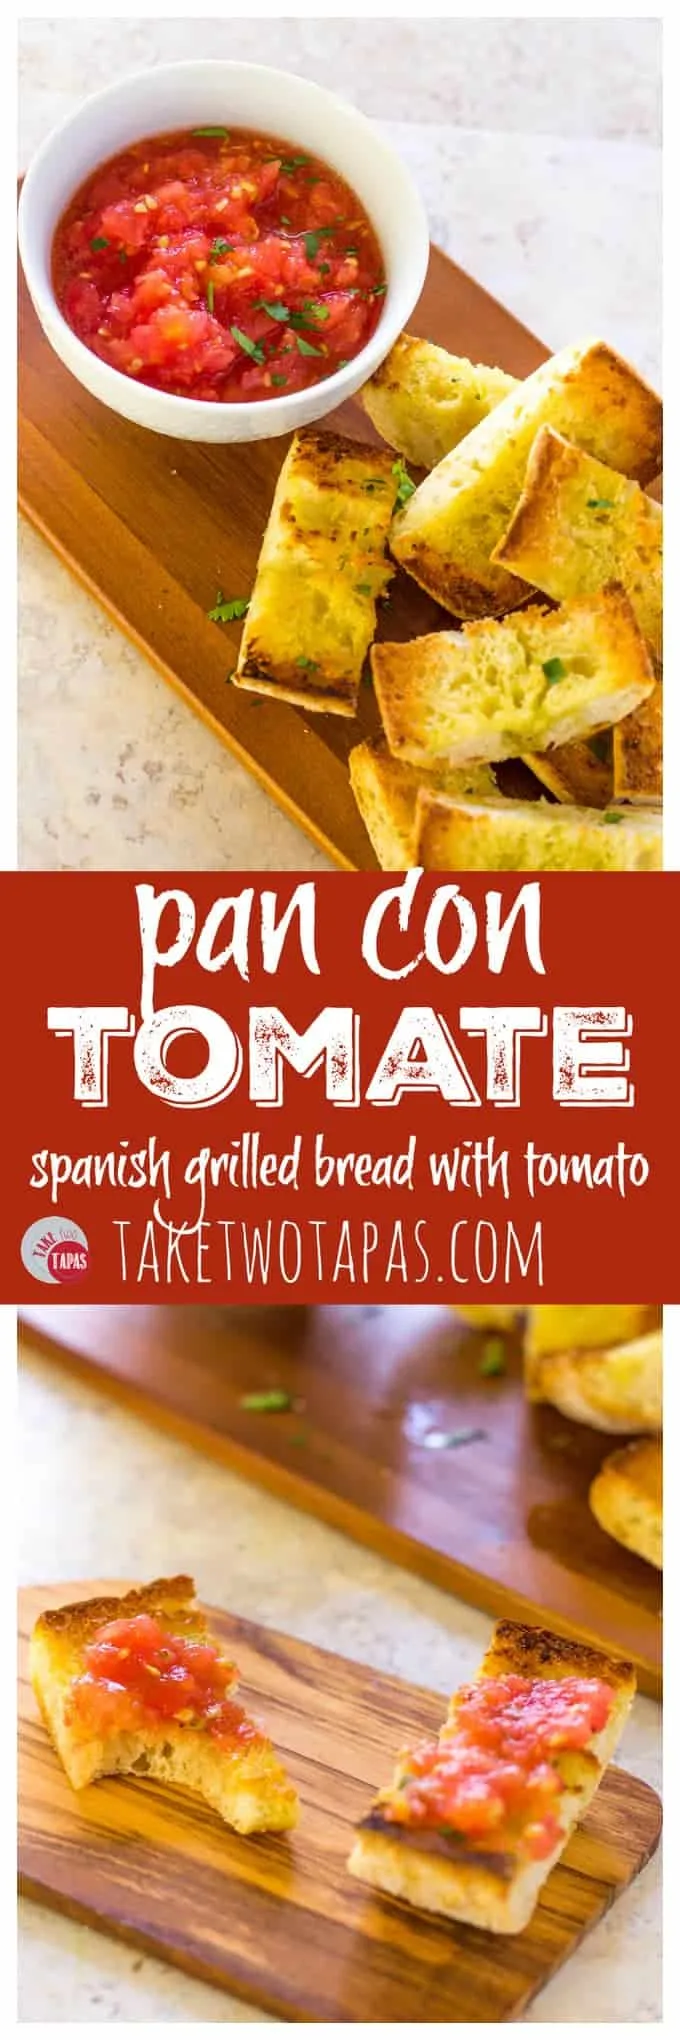 Pinterest collage image with text "pan con Tomate Spanish grilled bread with tomato"